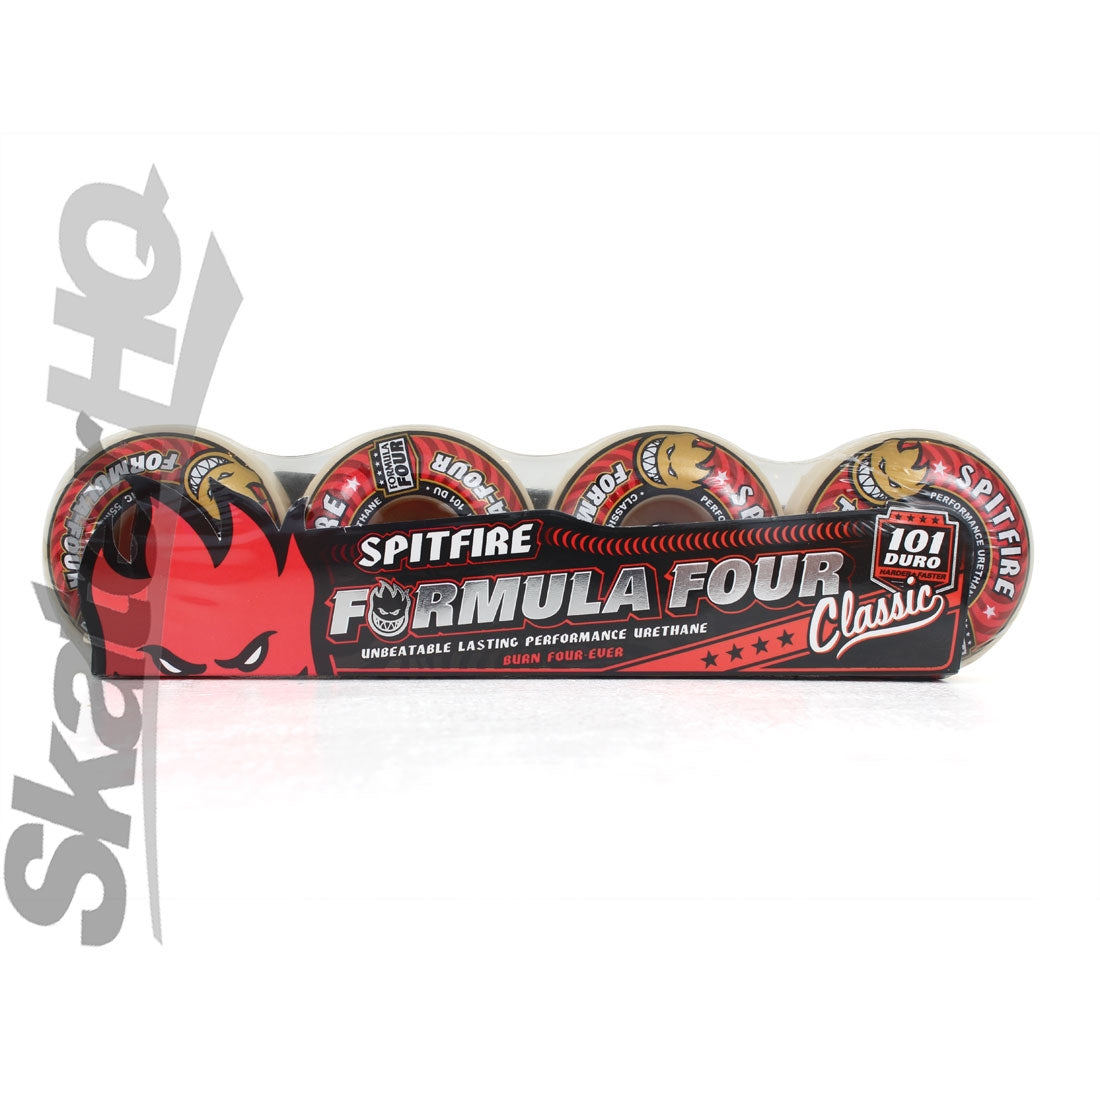 Spitfire Form Four 55mm 101A Classic 4pk - Red Skateboard Wheels